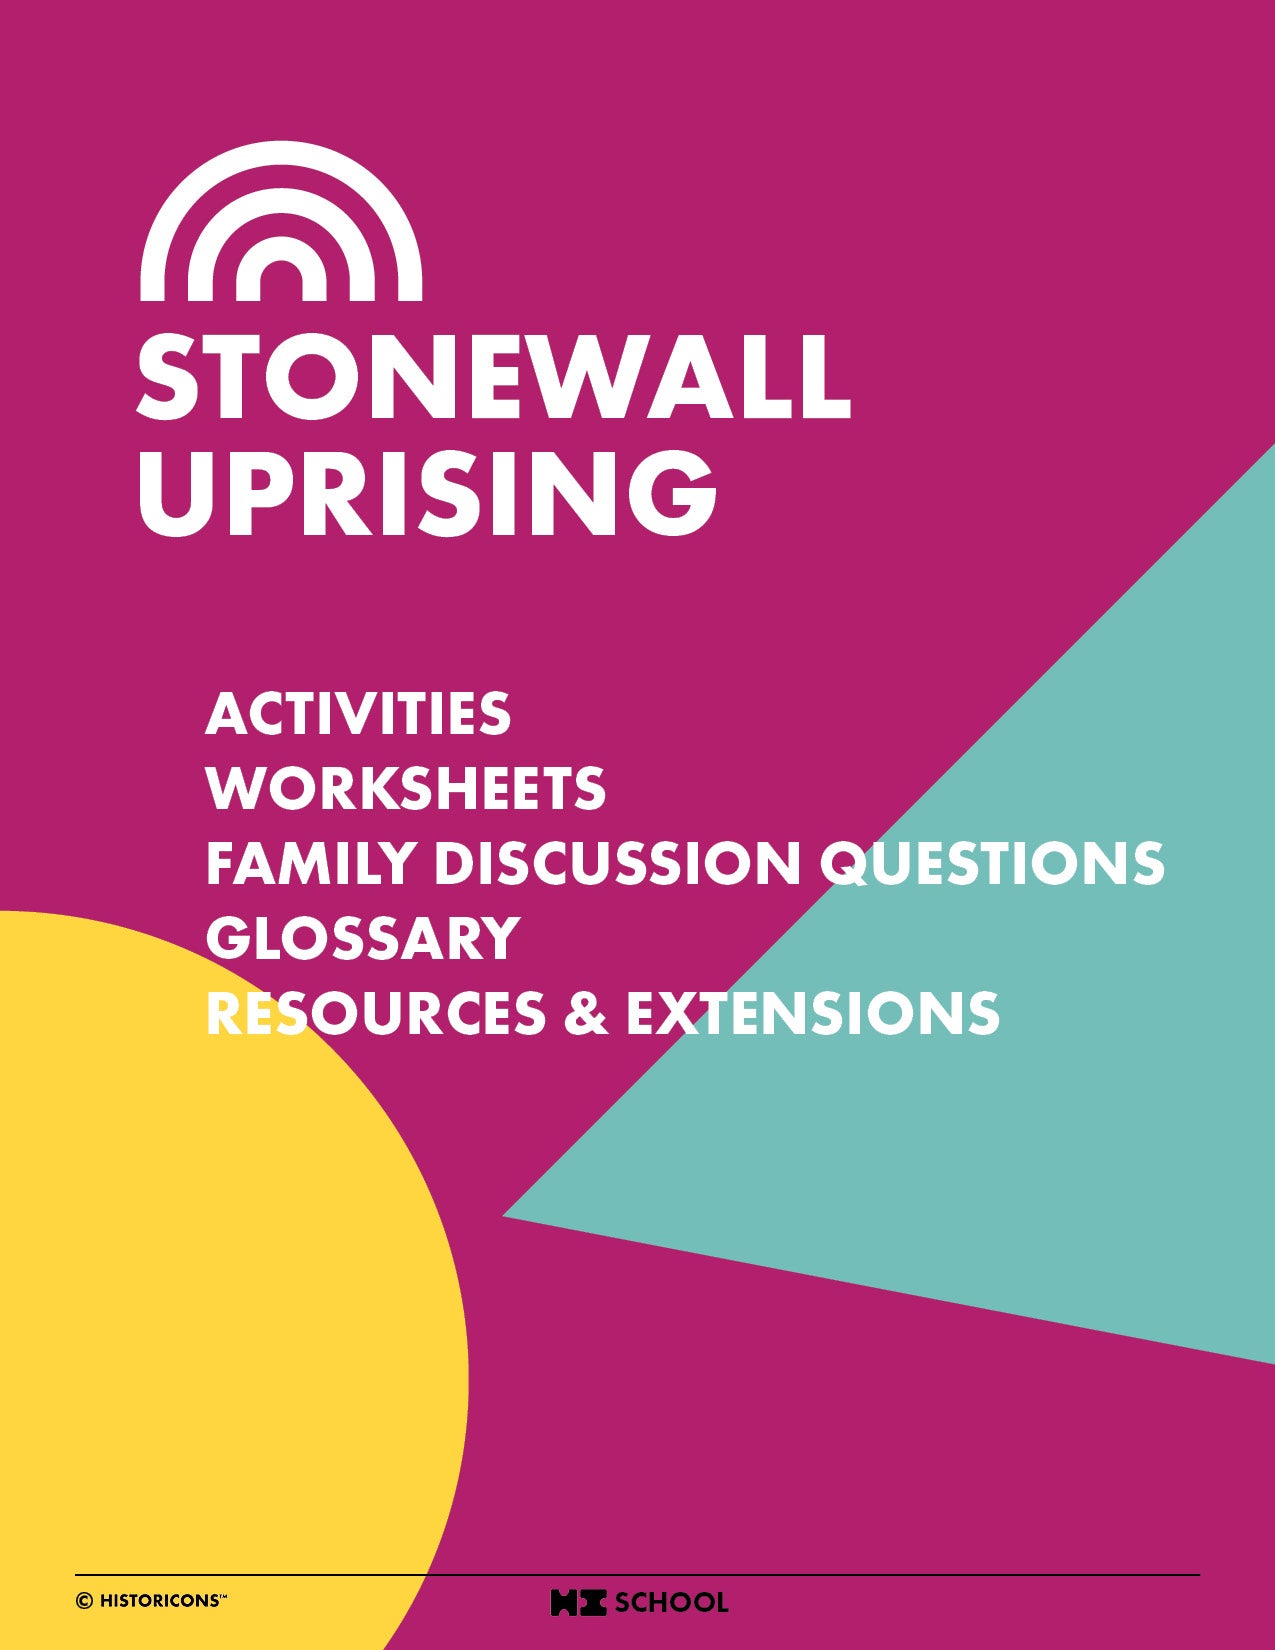 A colorful magenta, teal, and yellow cover photo of the HI School Stonewall Uprising activity pack is displayed, which shows a table of contents for fun diversity activities, Worksheets, Family Discussion Questions, Glossary, and Resources & Extensions to put allyship in action.